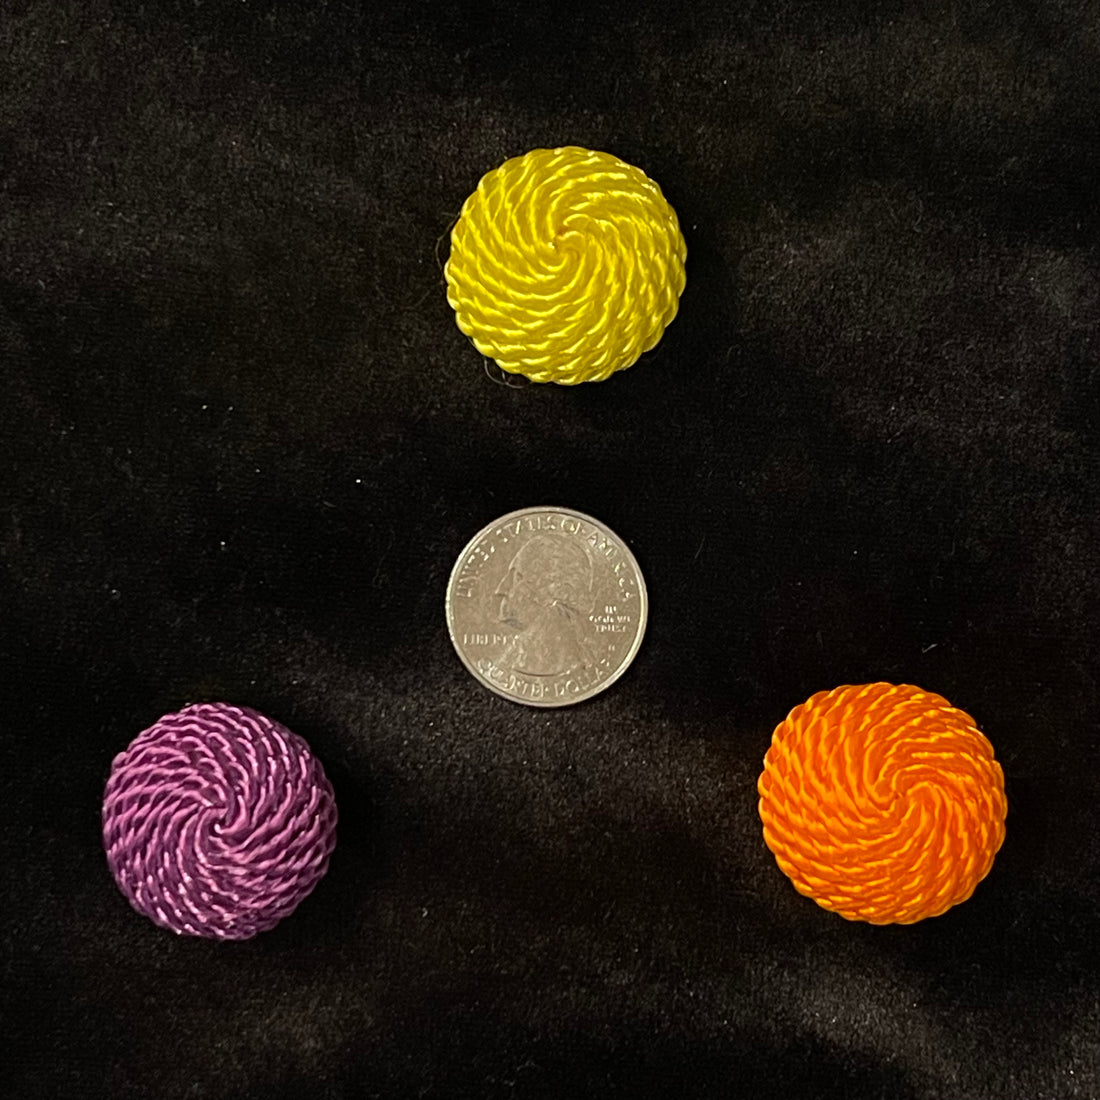 Vintage Yellow, Purple, and Orange Rope Pattern Round Button Covers Set of 3